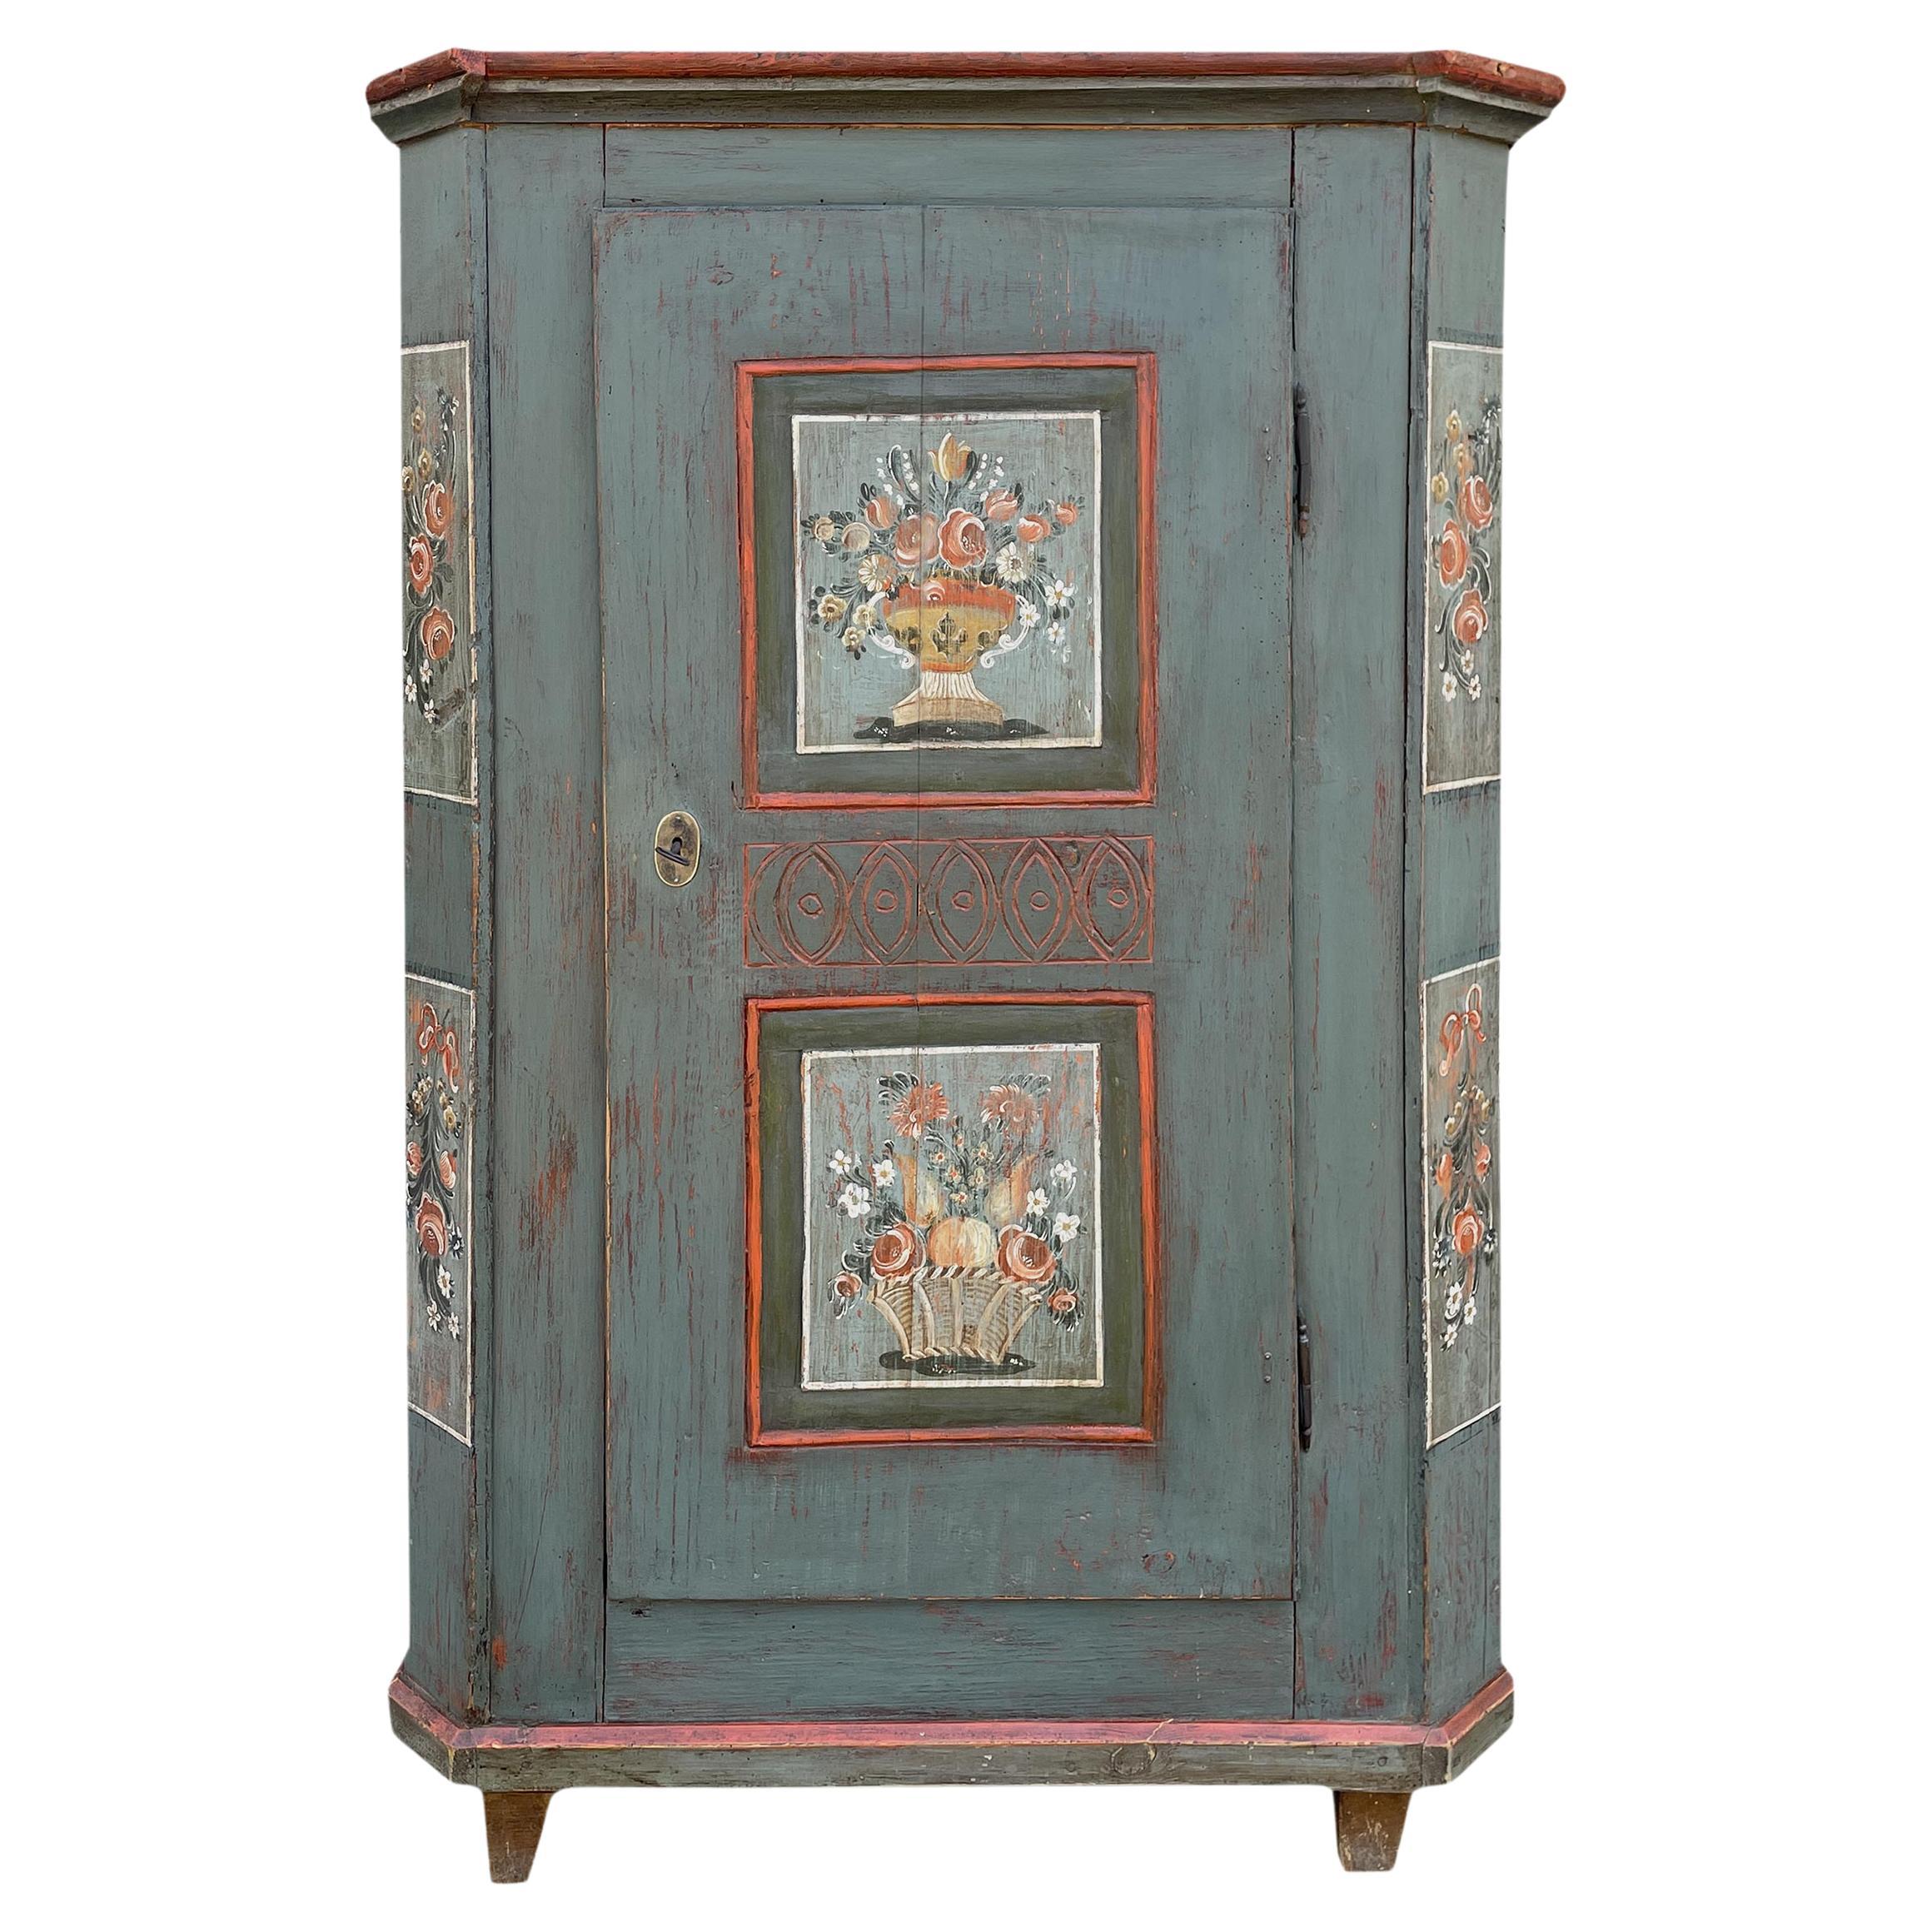 Early 19th Century Blue Floral Painted Cabinet